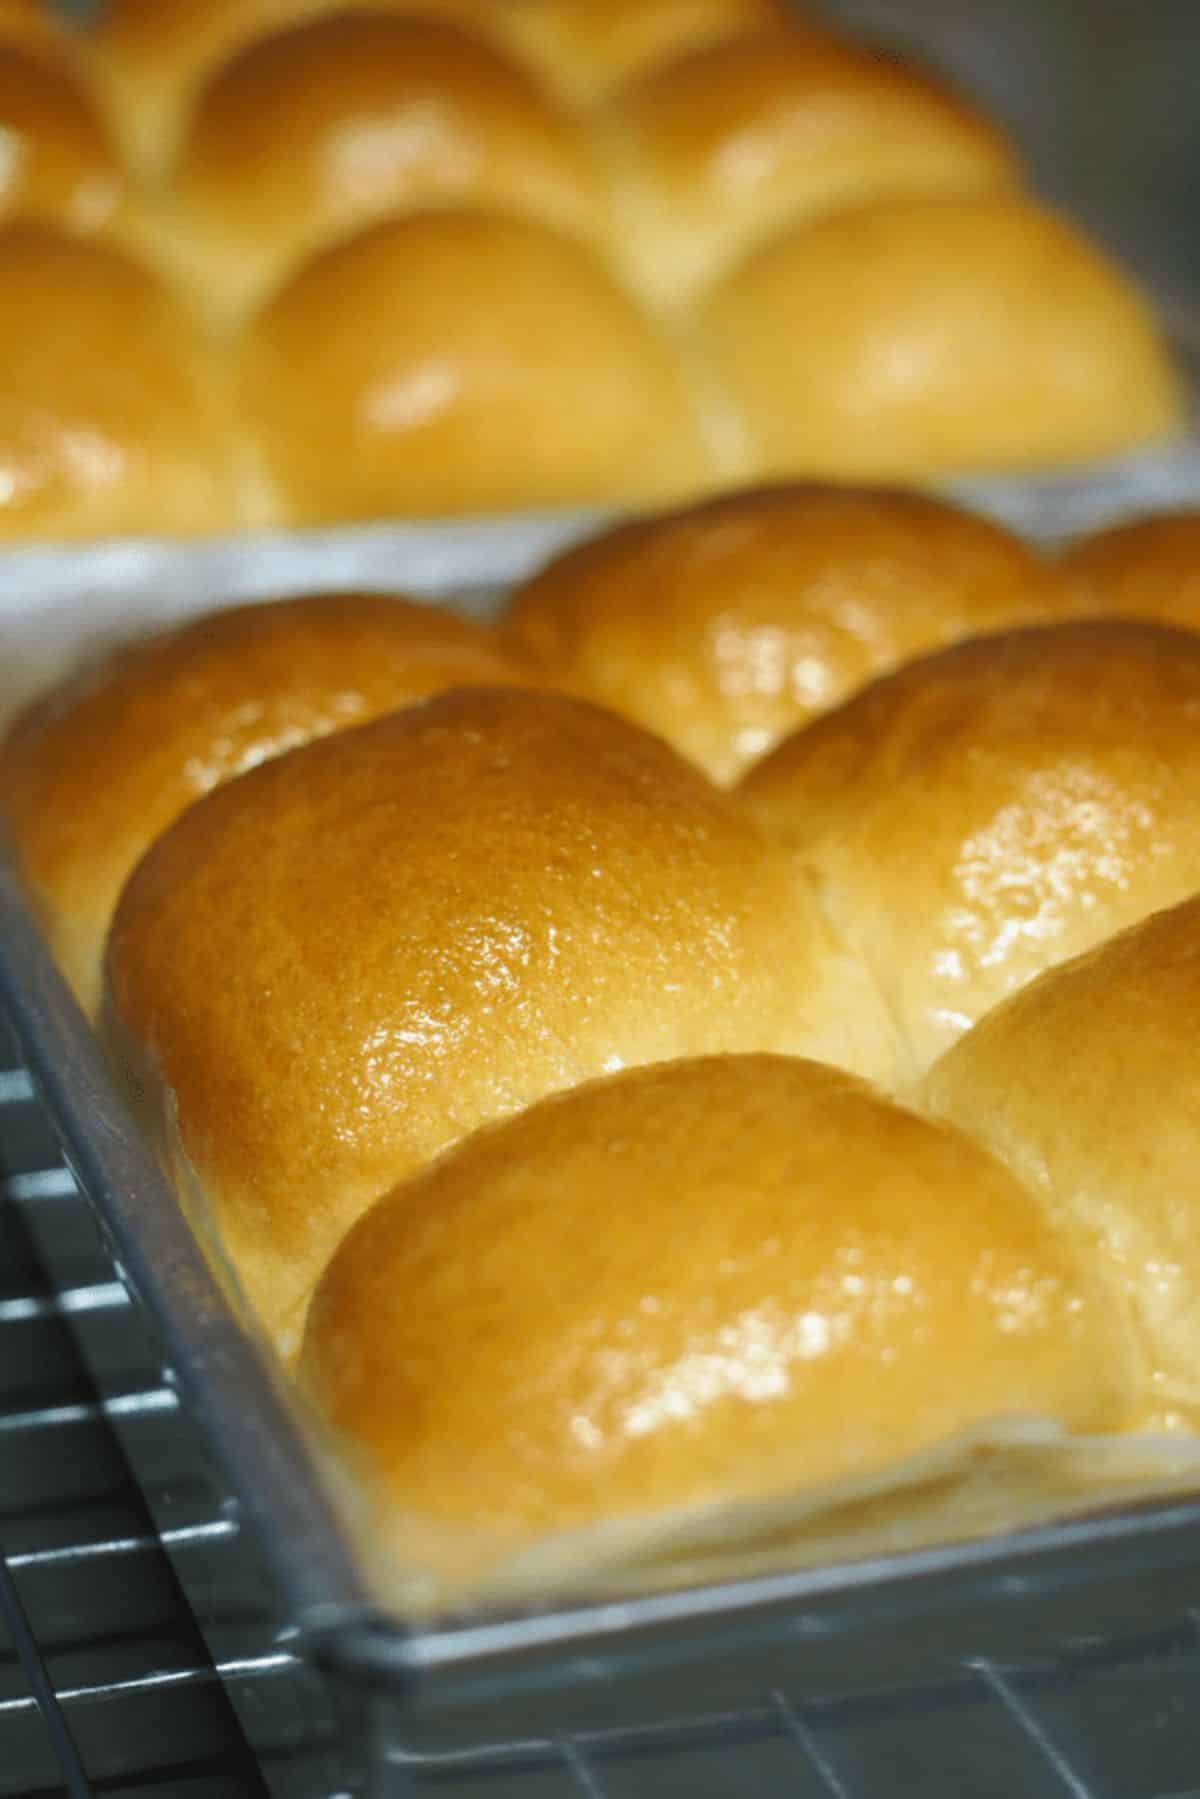 Flavorful Condensed Milk Bread in a bread pan.